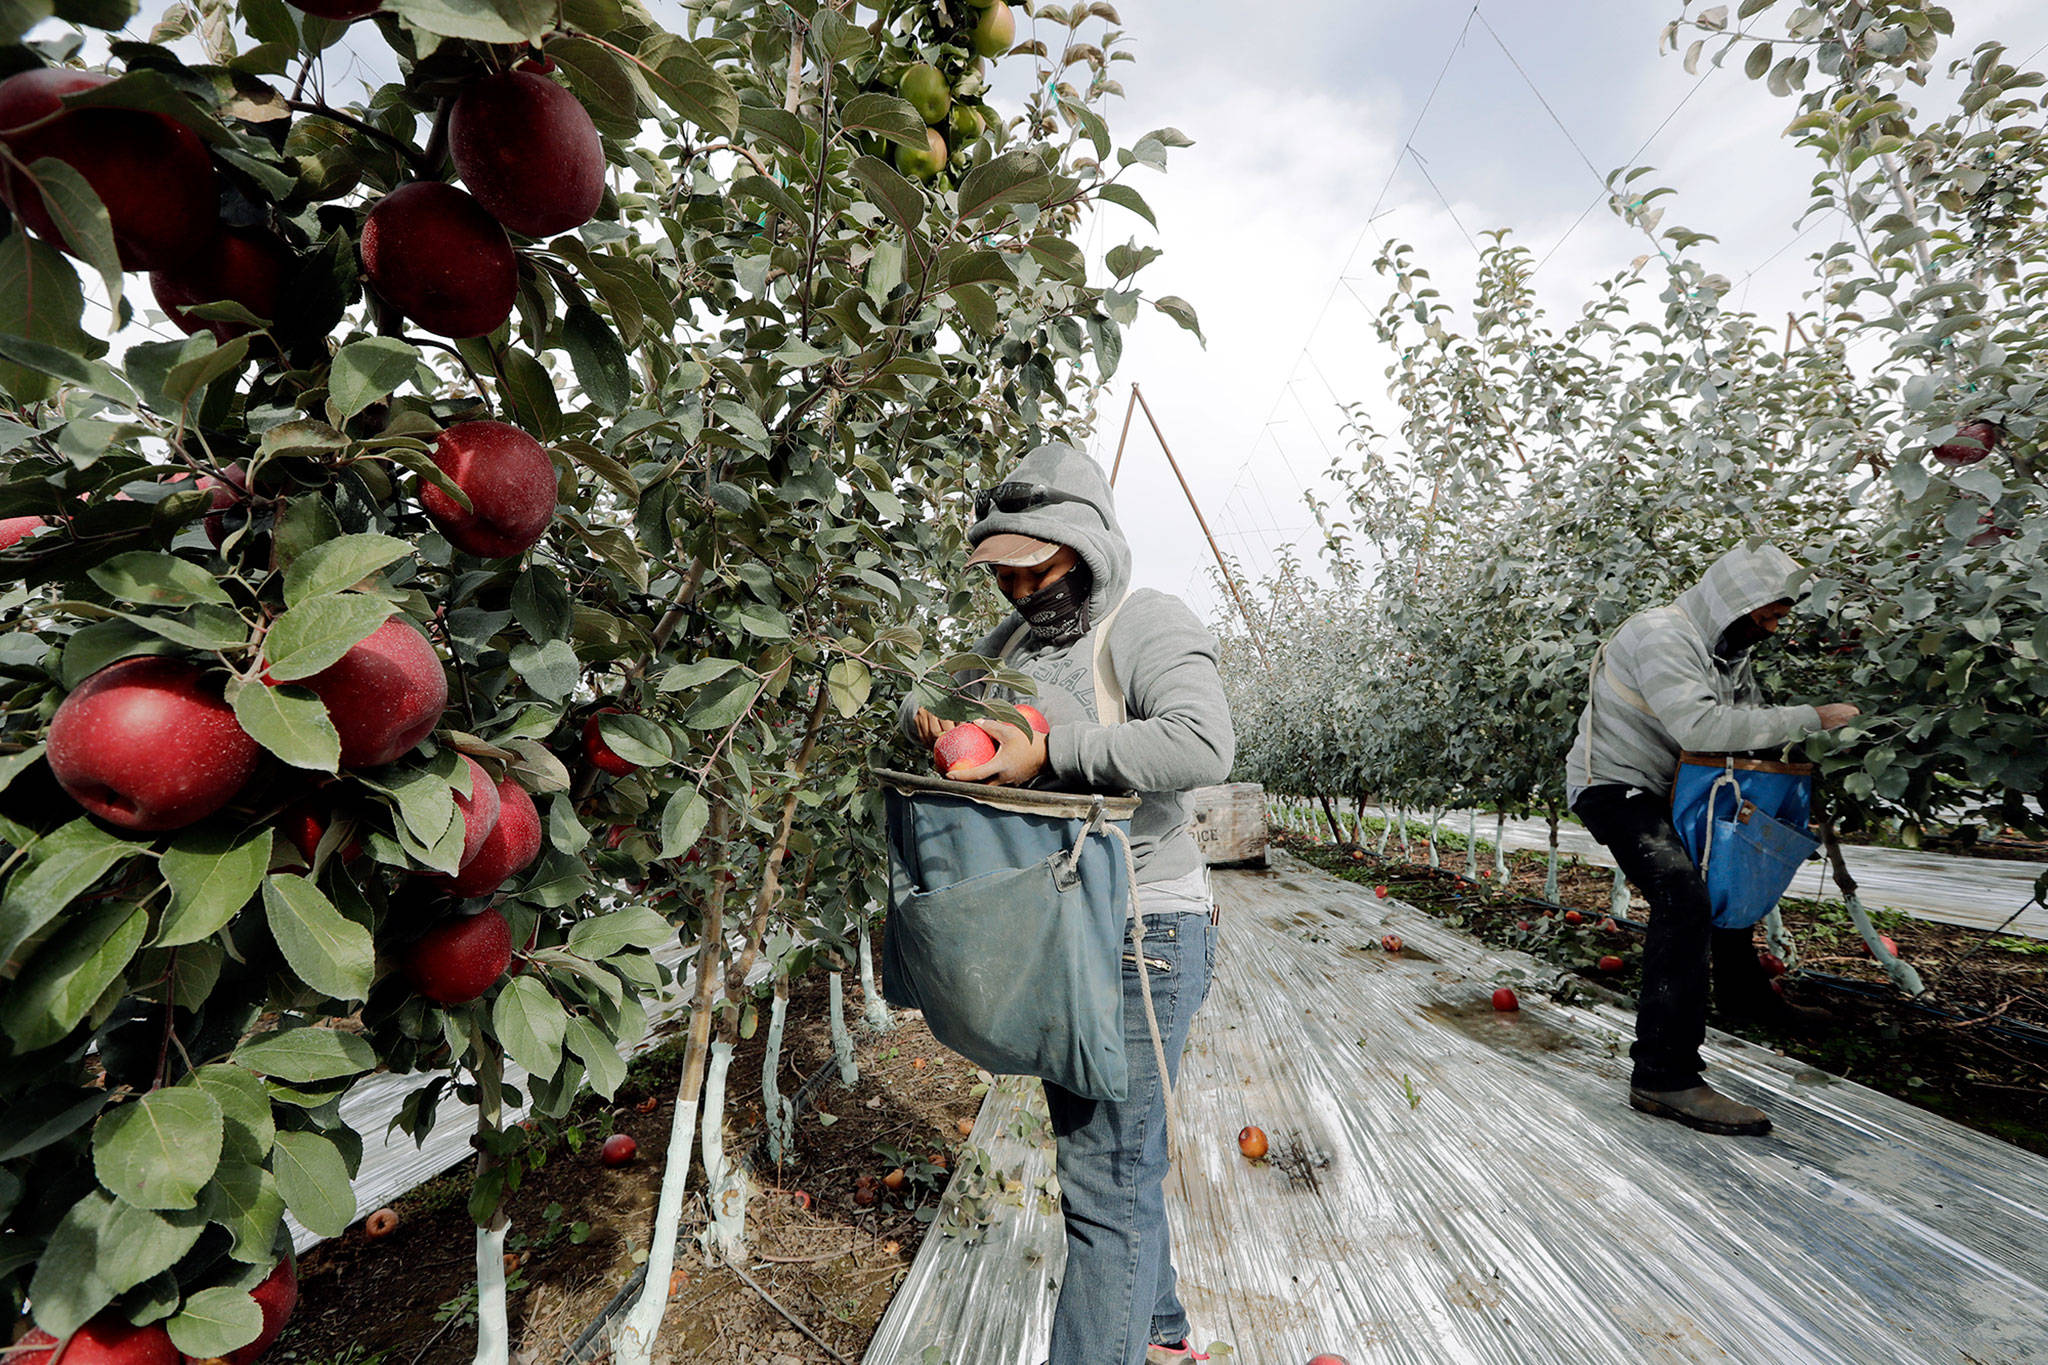 Workers Edilia Ortega (left) and Reynaldo Enriquez pick Cosmic Crisp apples, a new variety and the first-ever bred in Washington, at an orchard in Wapato in October. (AP Photo/Elaine Thompson)